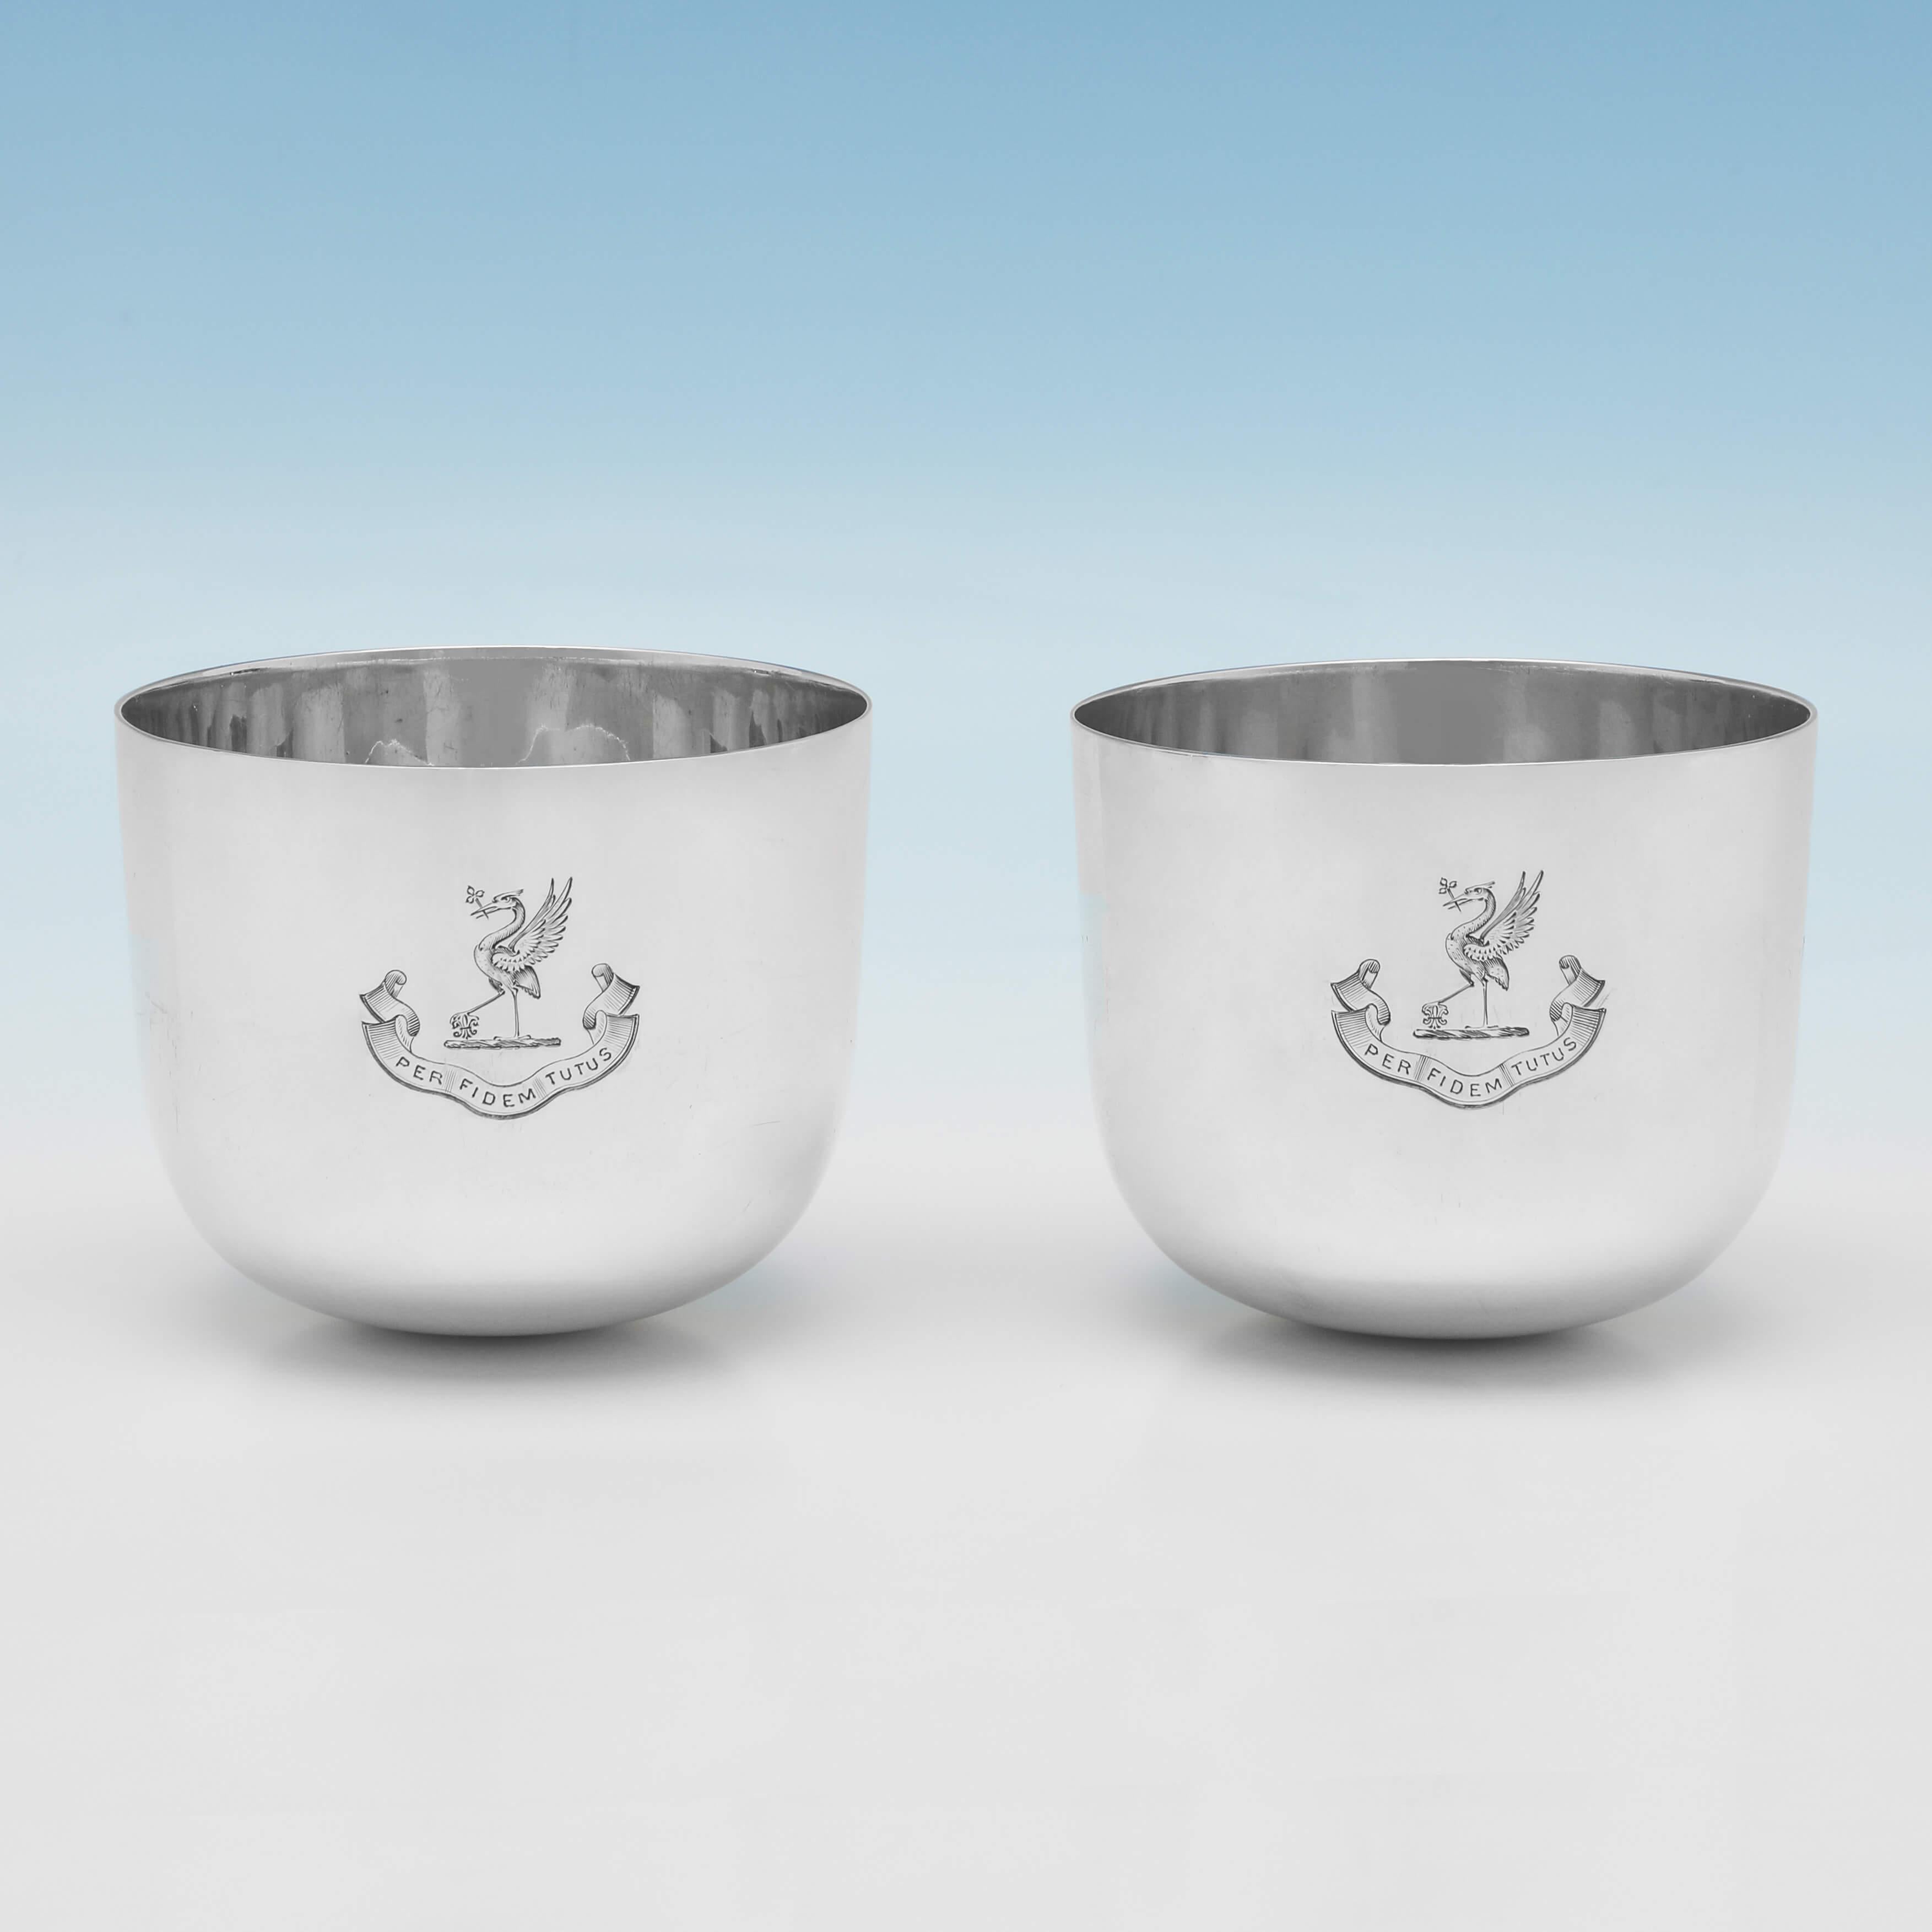 Hallmarked in Sheffield in 1913 by Hawksworth Eyres & Co., this very handsome, Antique Sterling Silver Pair of Tumbler Cups, are presented in their original box, and are both engraved with a crest and motto. Each tumbler cup measures 2.5